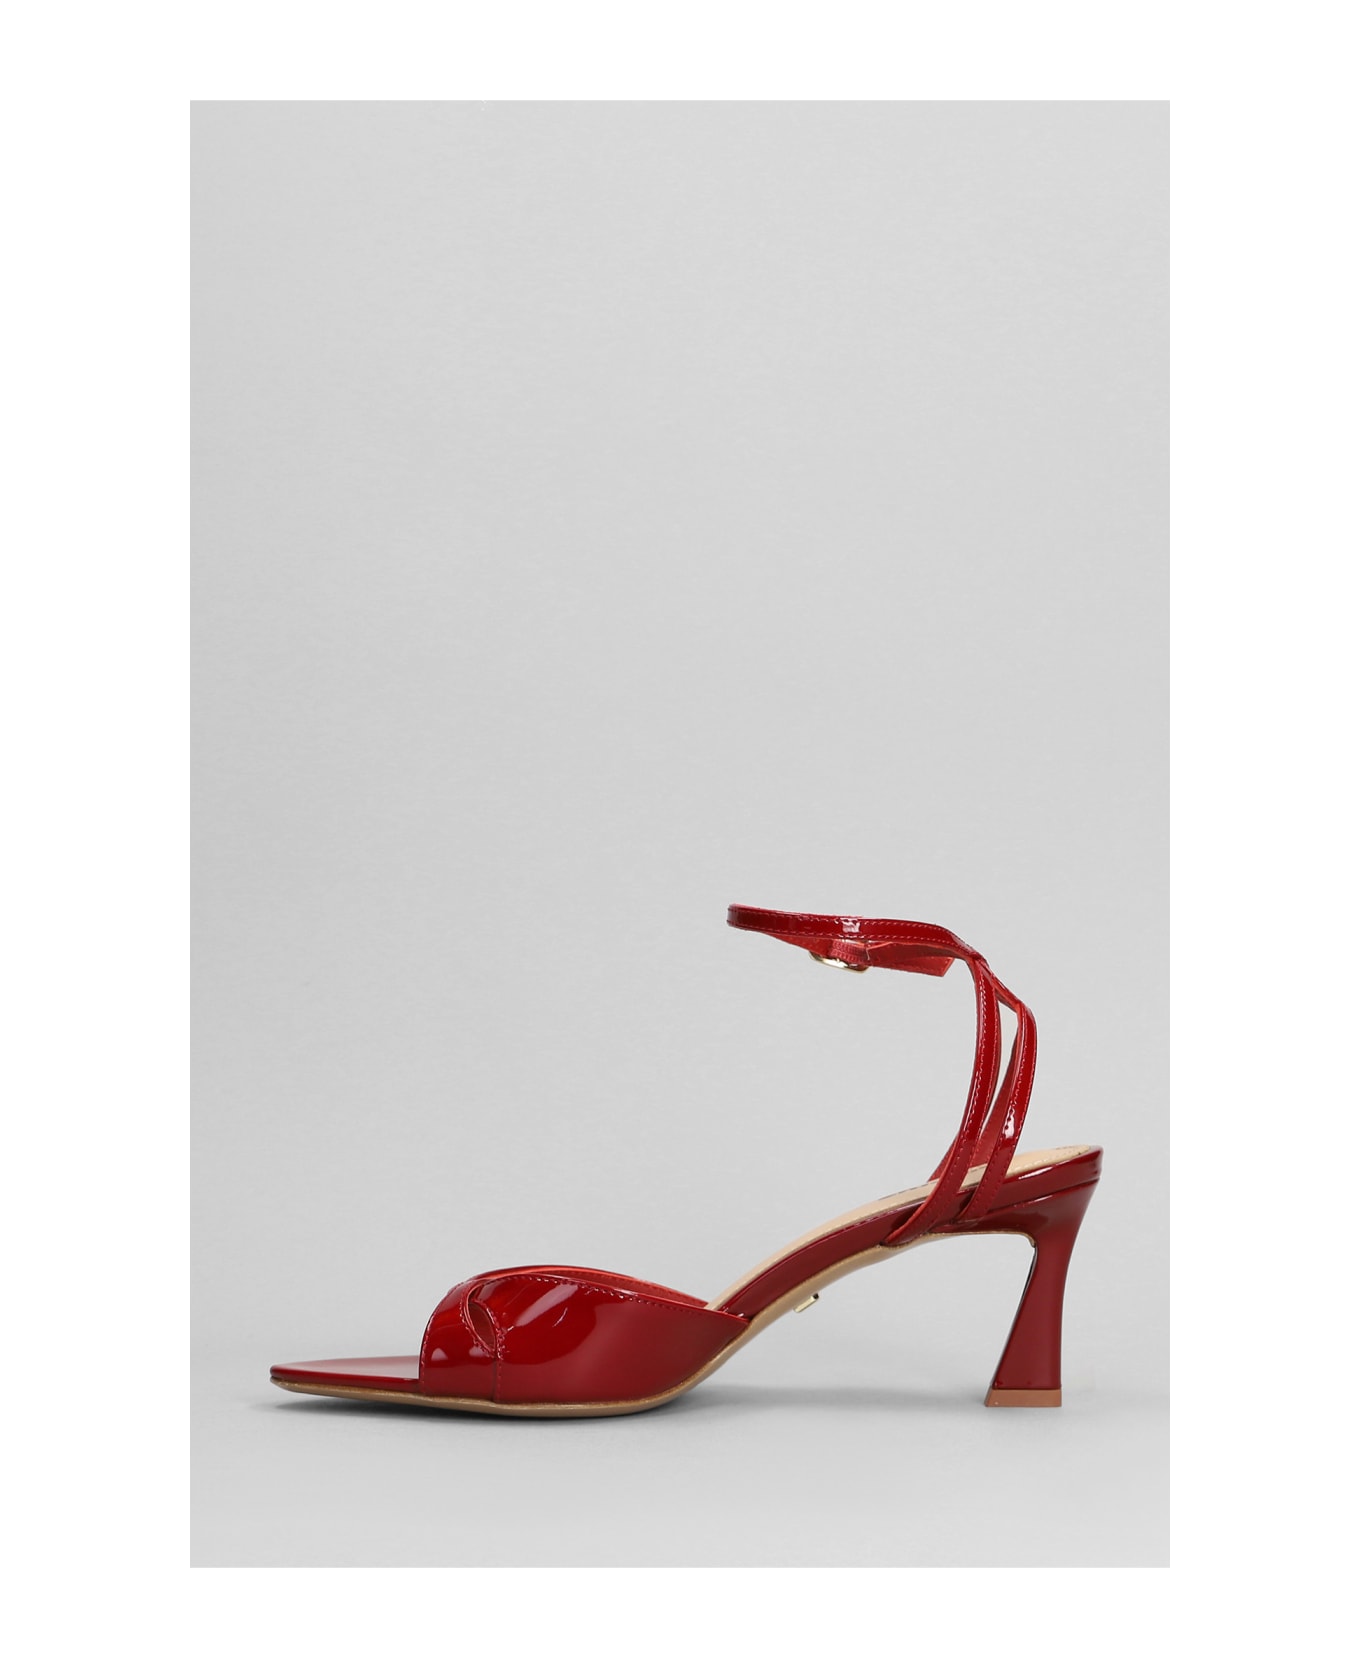 Lola Cruz Bianca 65 Sandals In Red Patent Leather - red